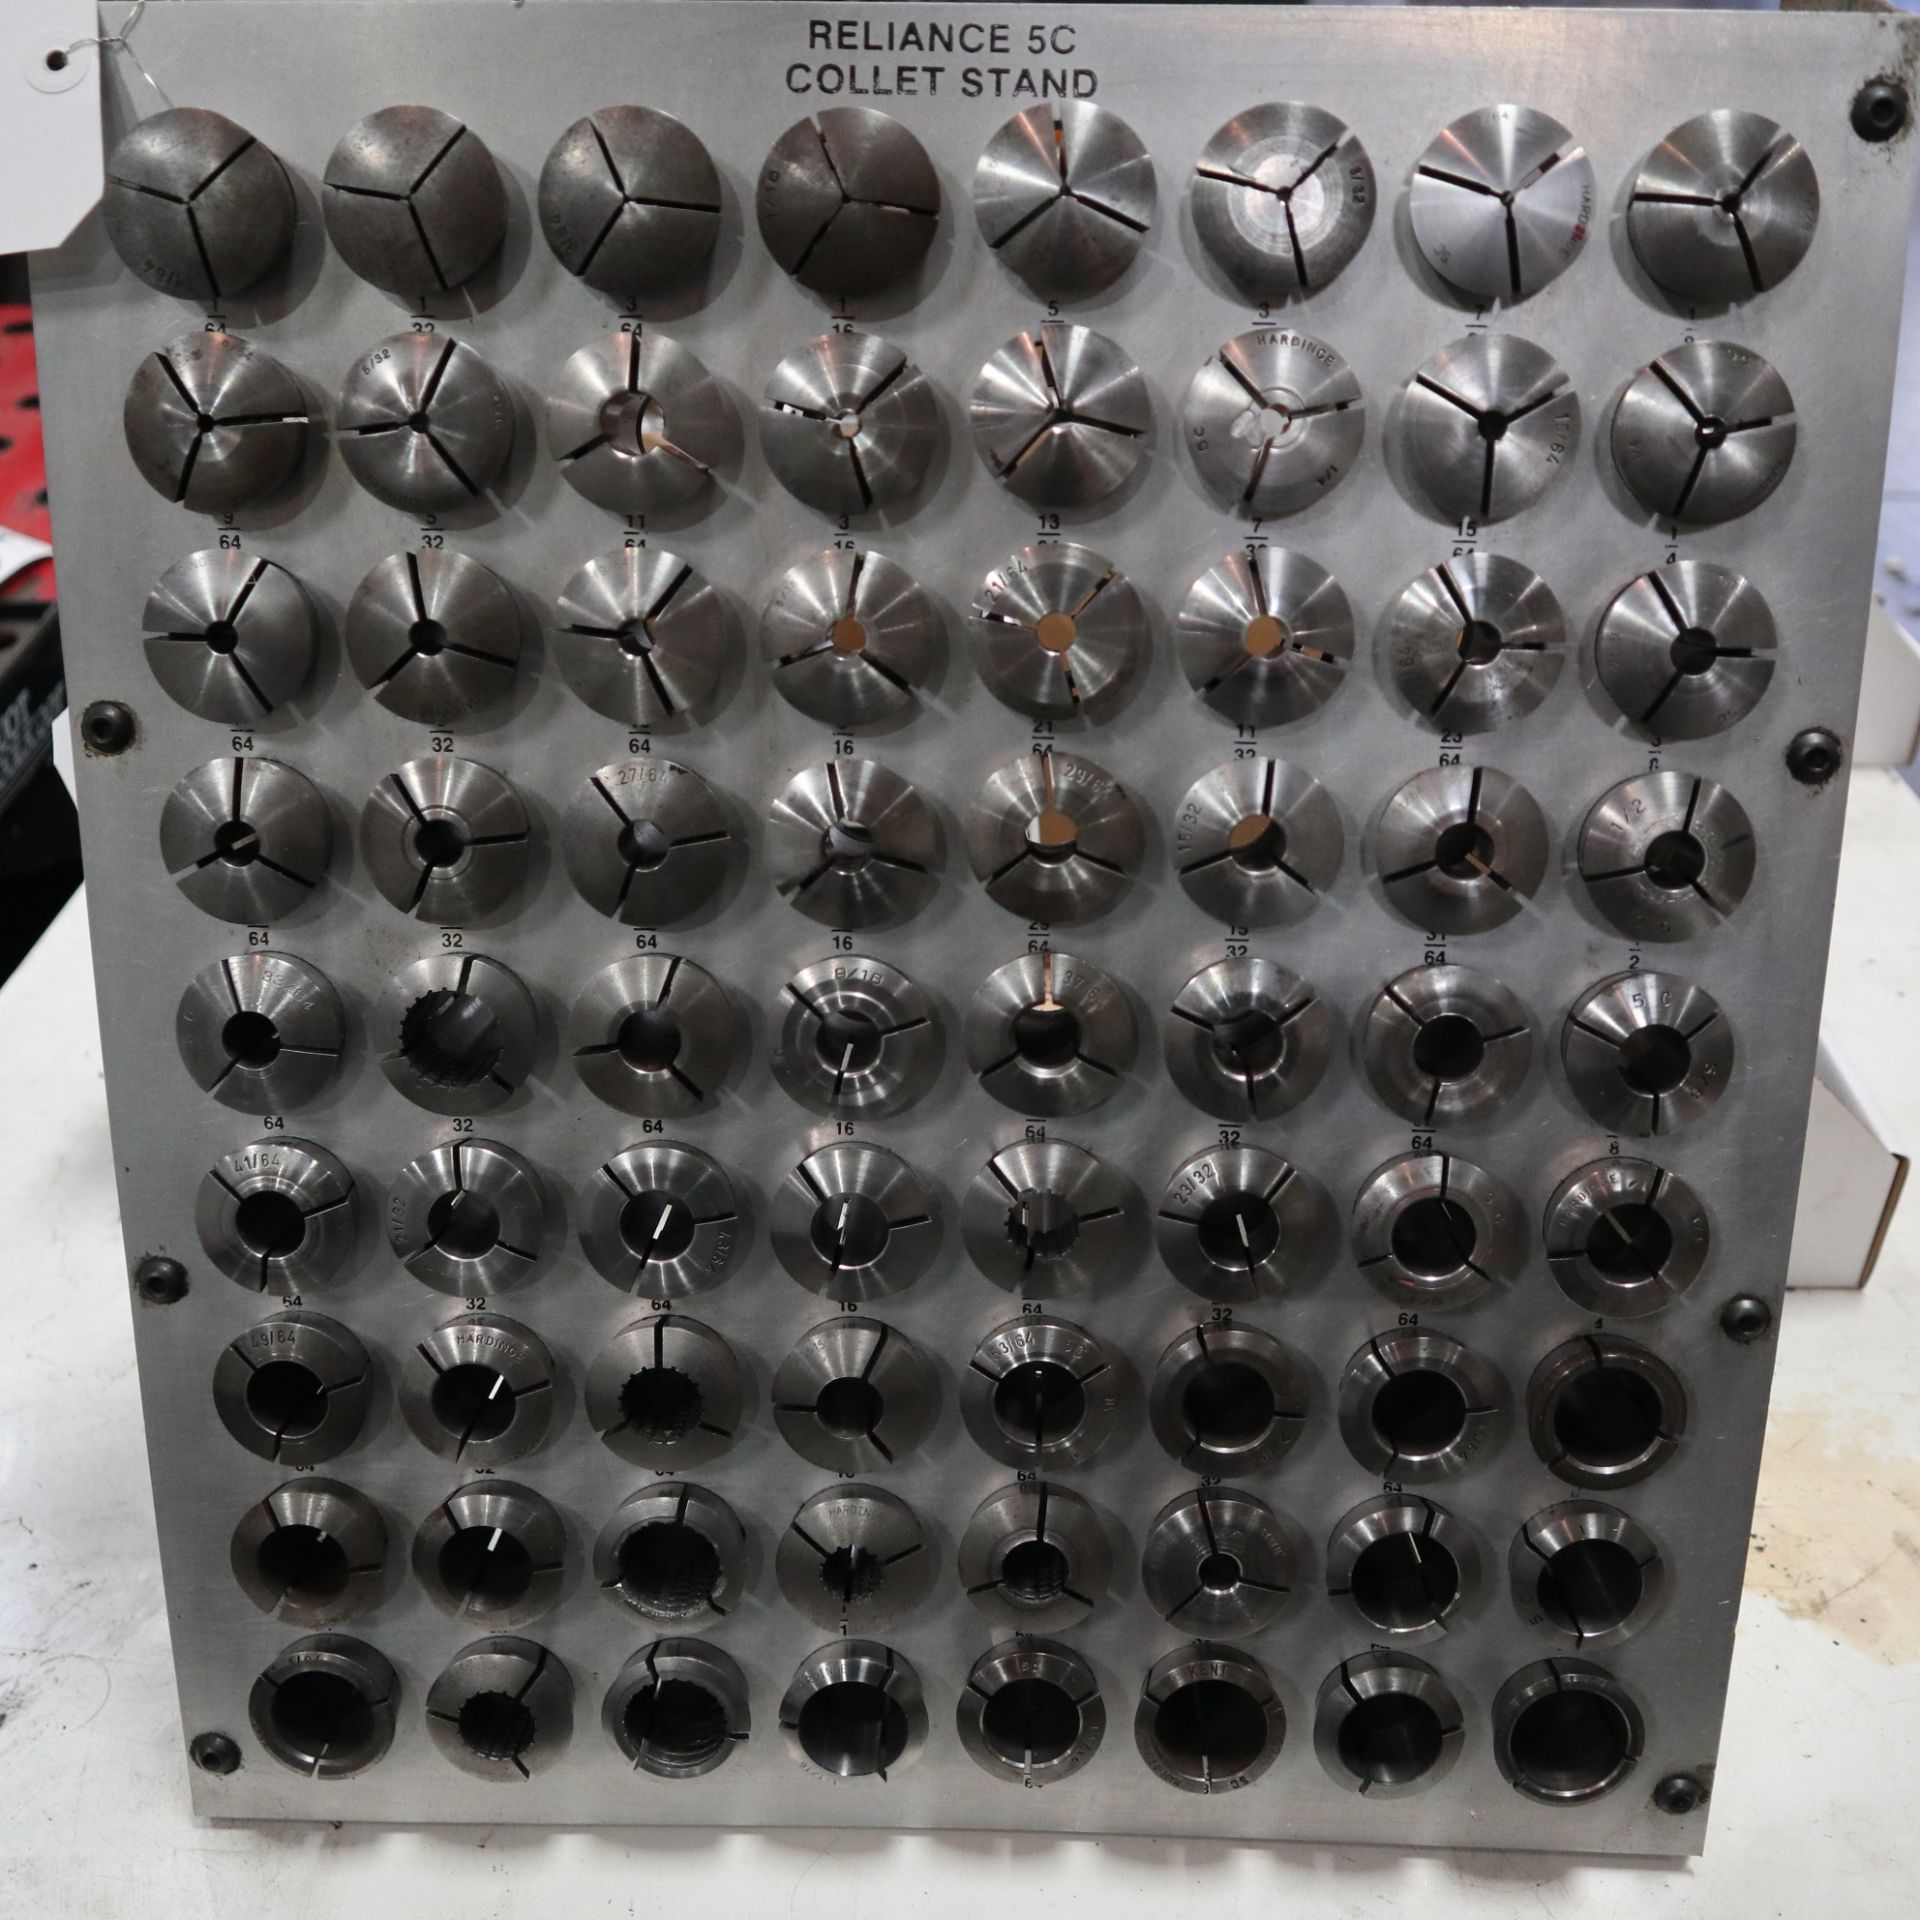 5C COLLET ORGANIZER WITH 5C COLLETS - Image 2 of 2